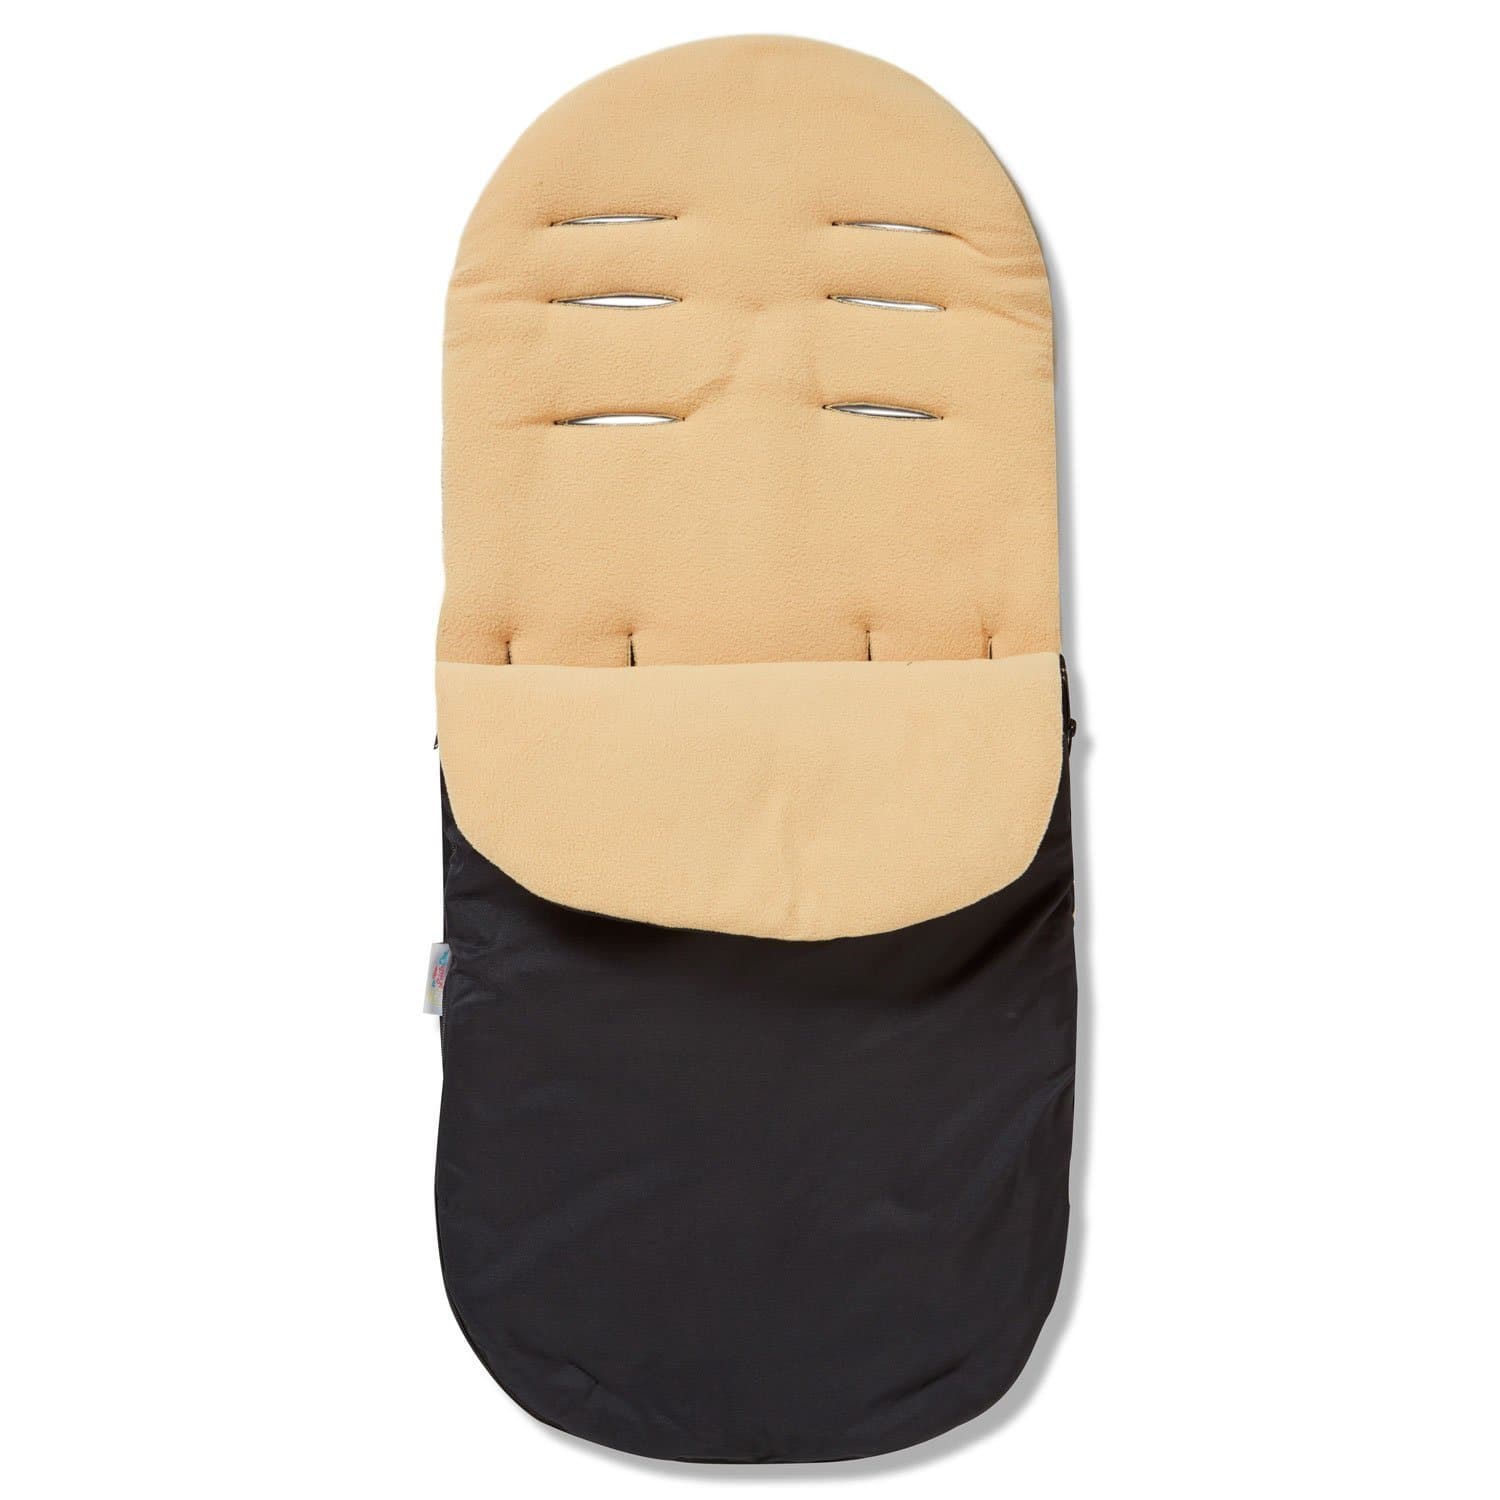 Footmuff / Cosy Toes Compatible with Graco - Sand / Fits All Models | For Your Little One